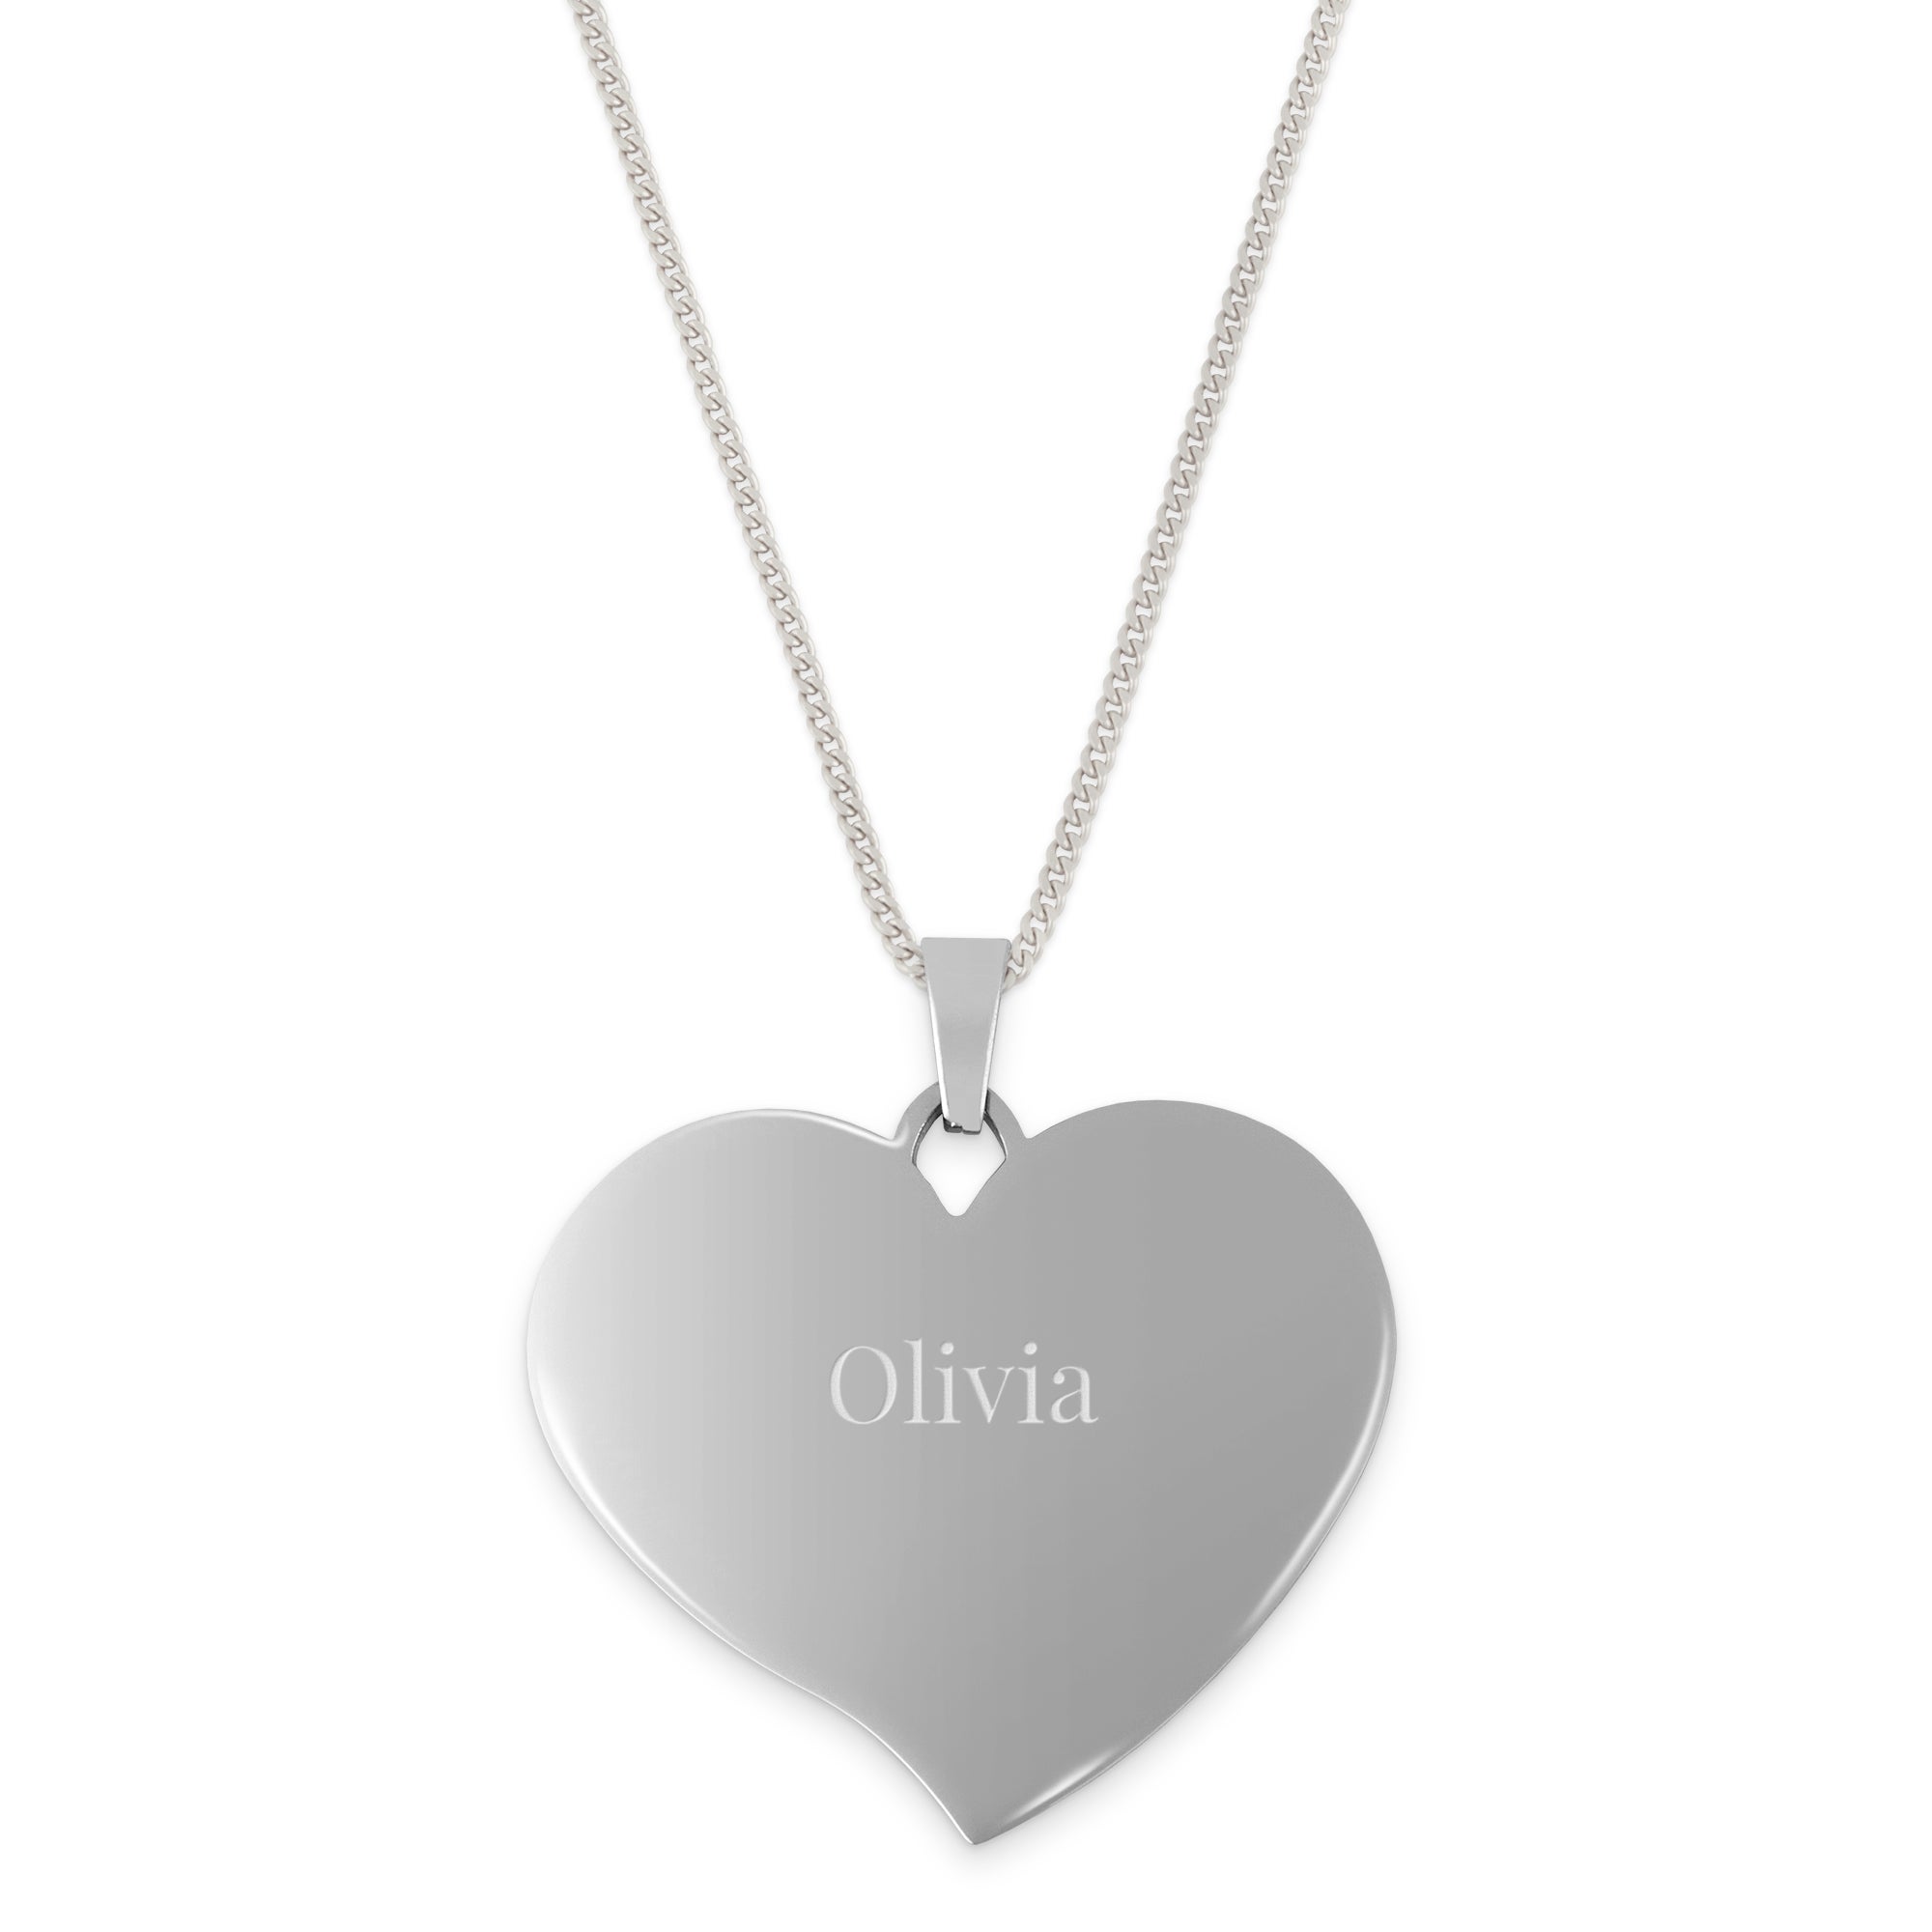 Heart necklace with name - large - silver